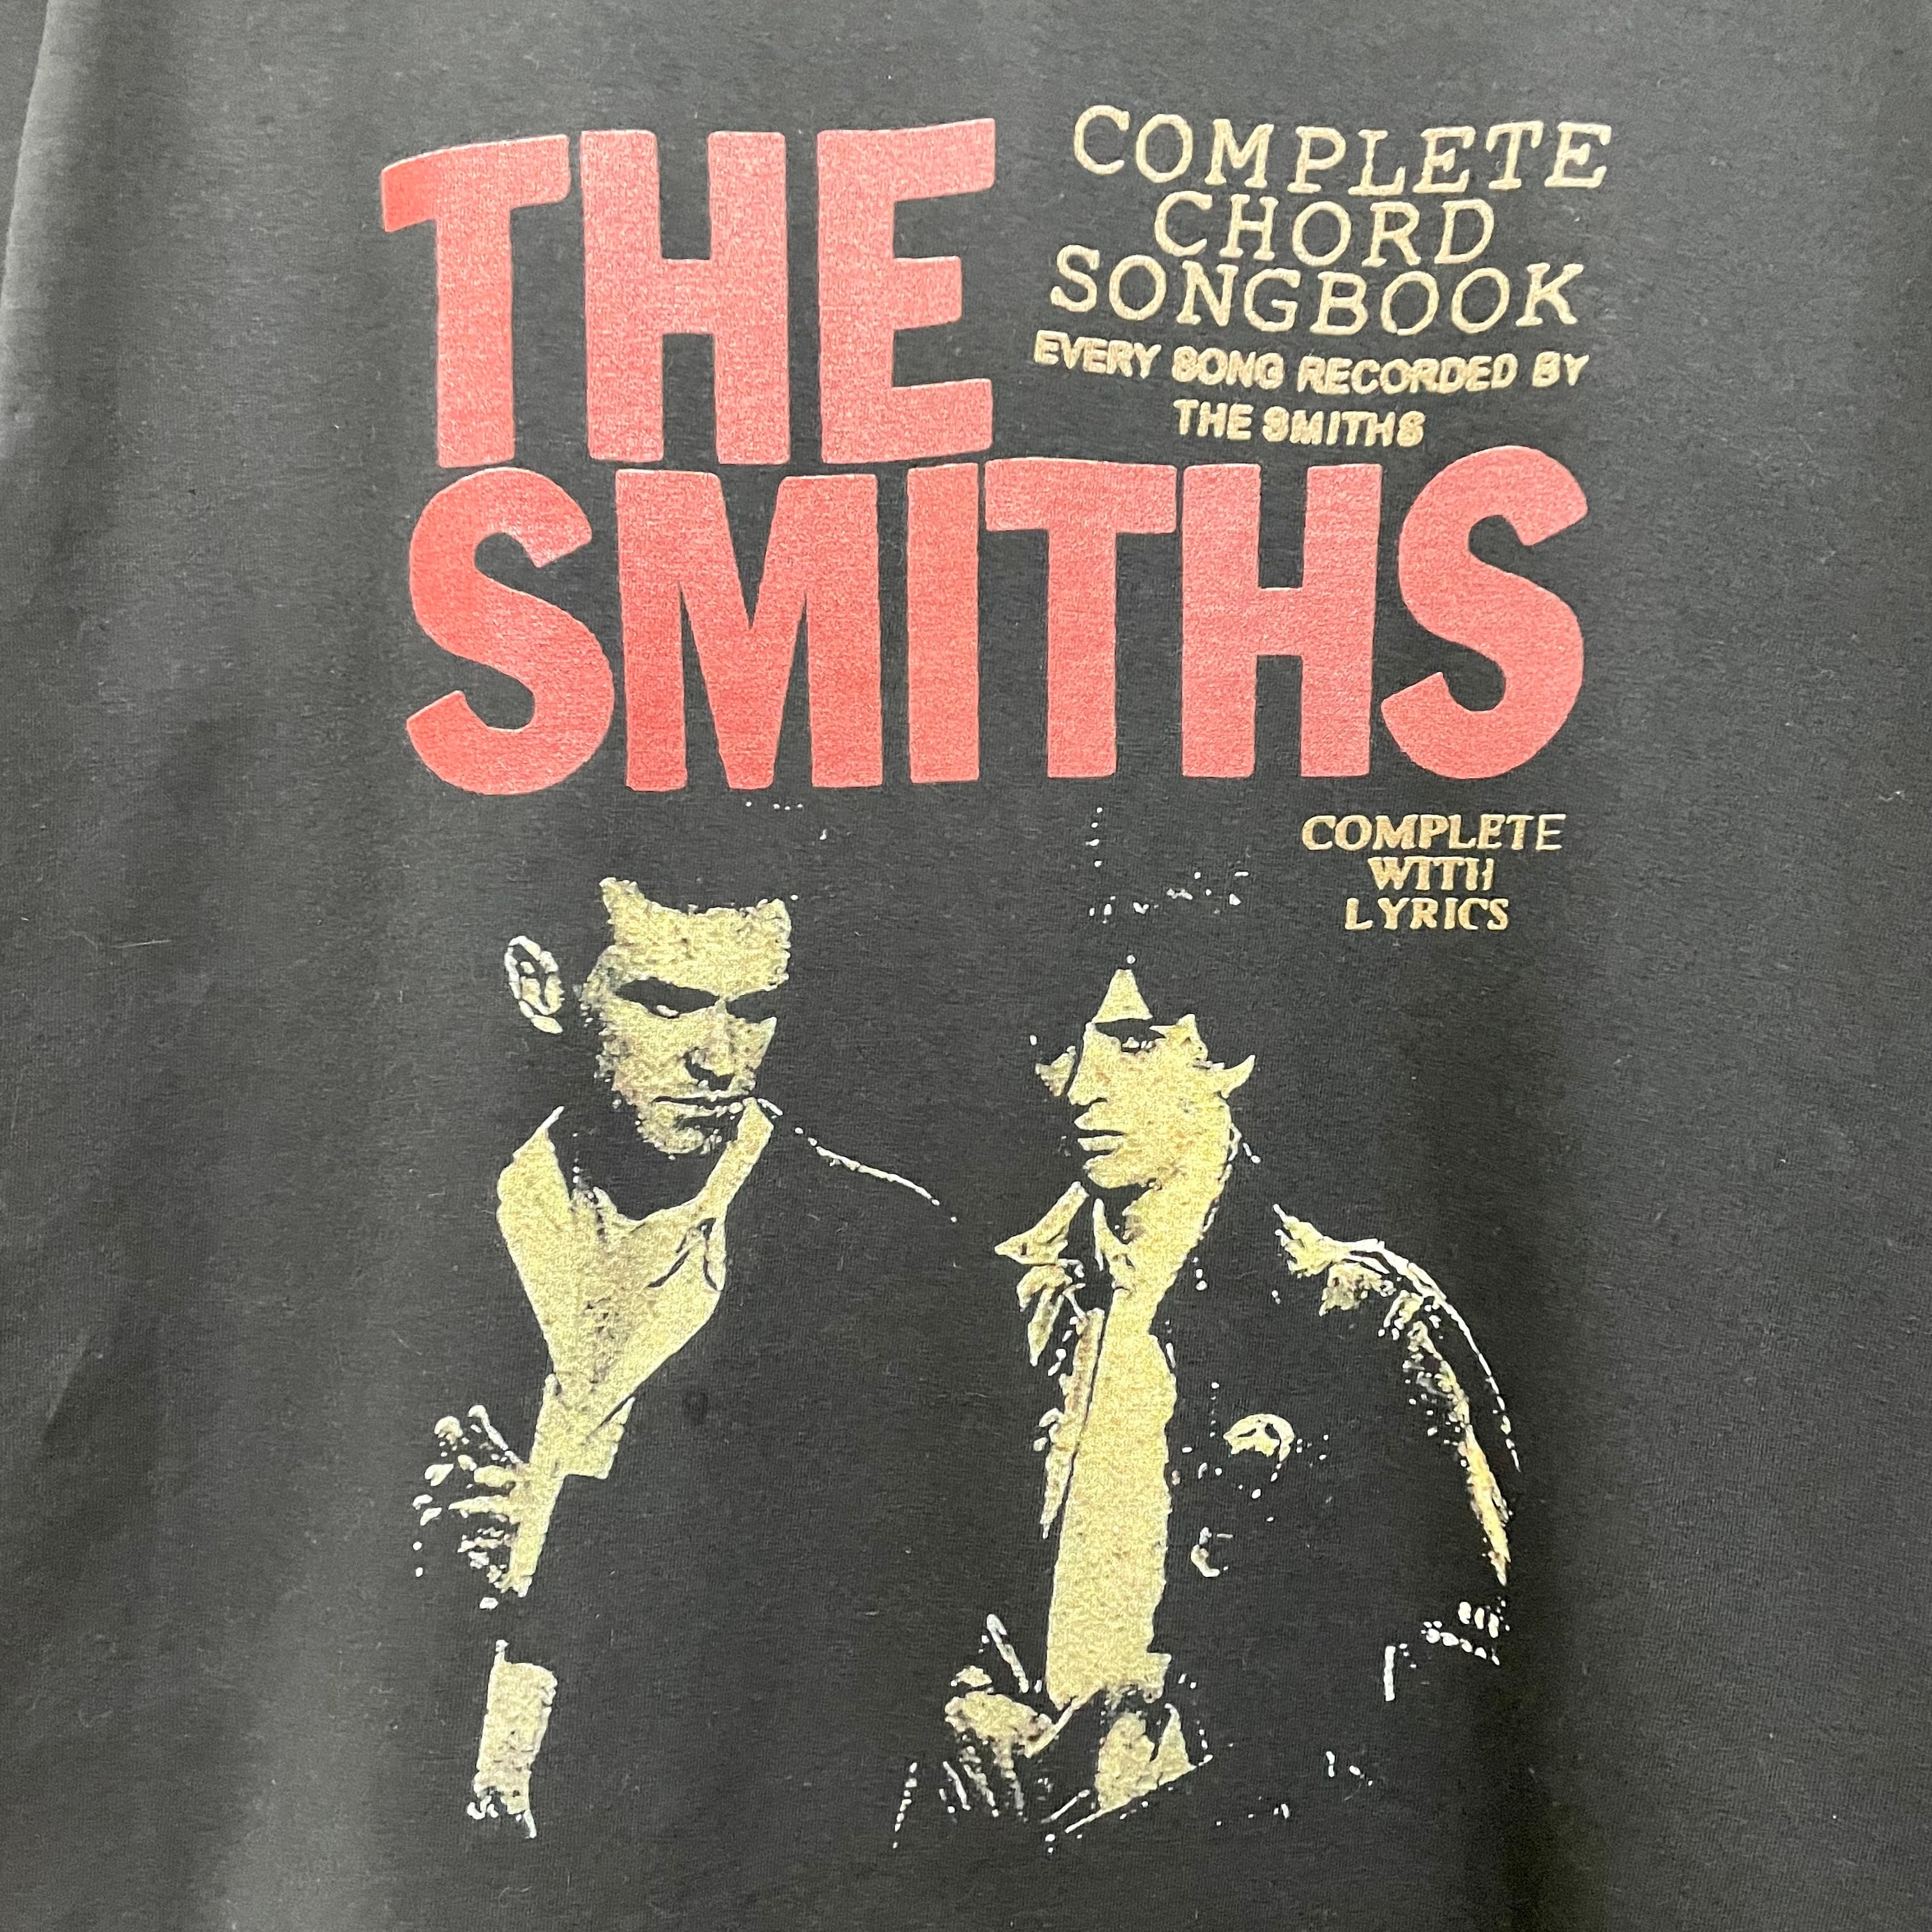 THE SMITHS Tシャツ スミスCOMPLETE CHORD SONGBOOK Tee | BF MERCH'S